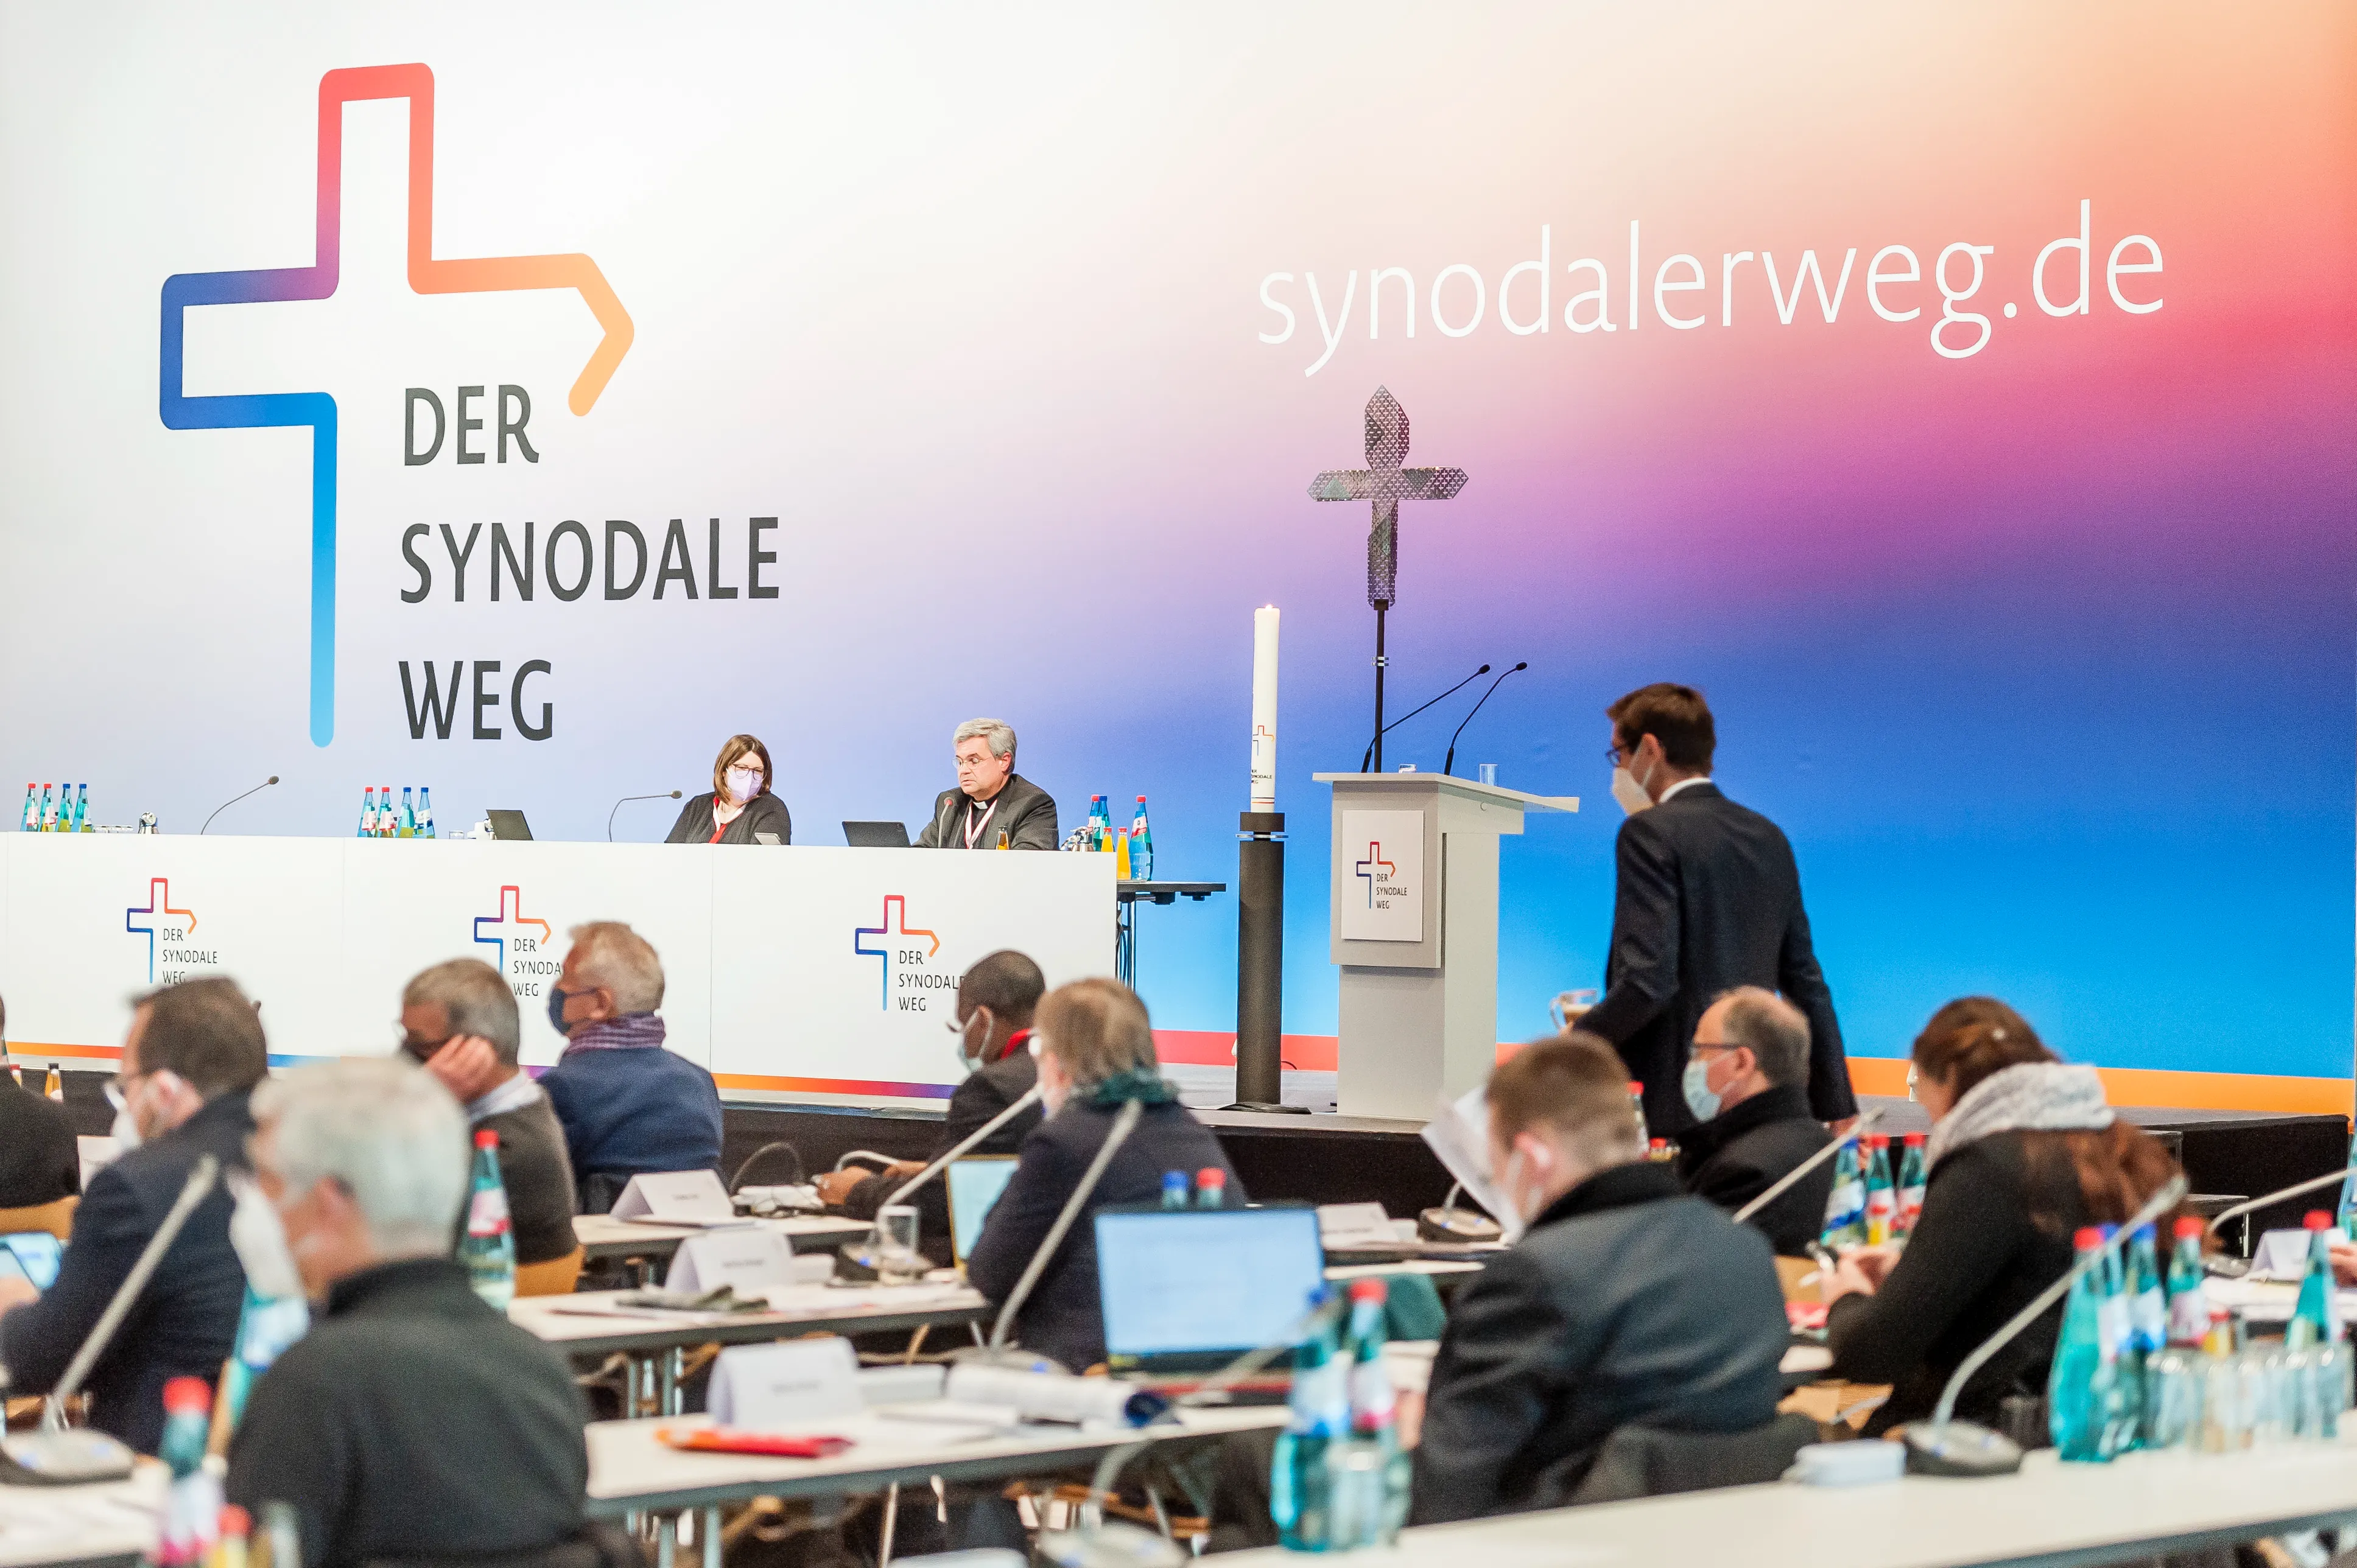 A meeting of the "Synodal Way" in Frankfurt, Germany in February, 2022.?w=200&h=150